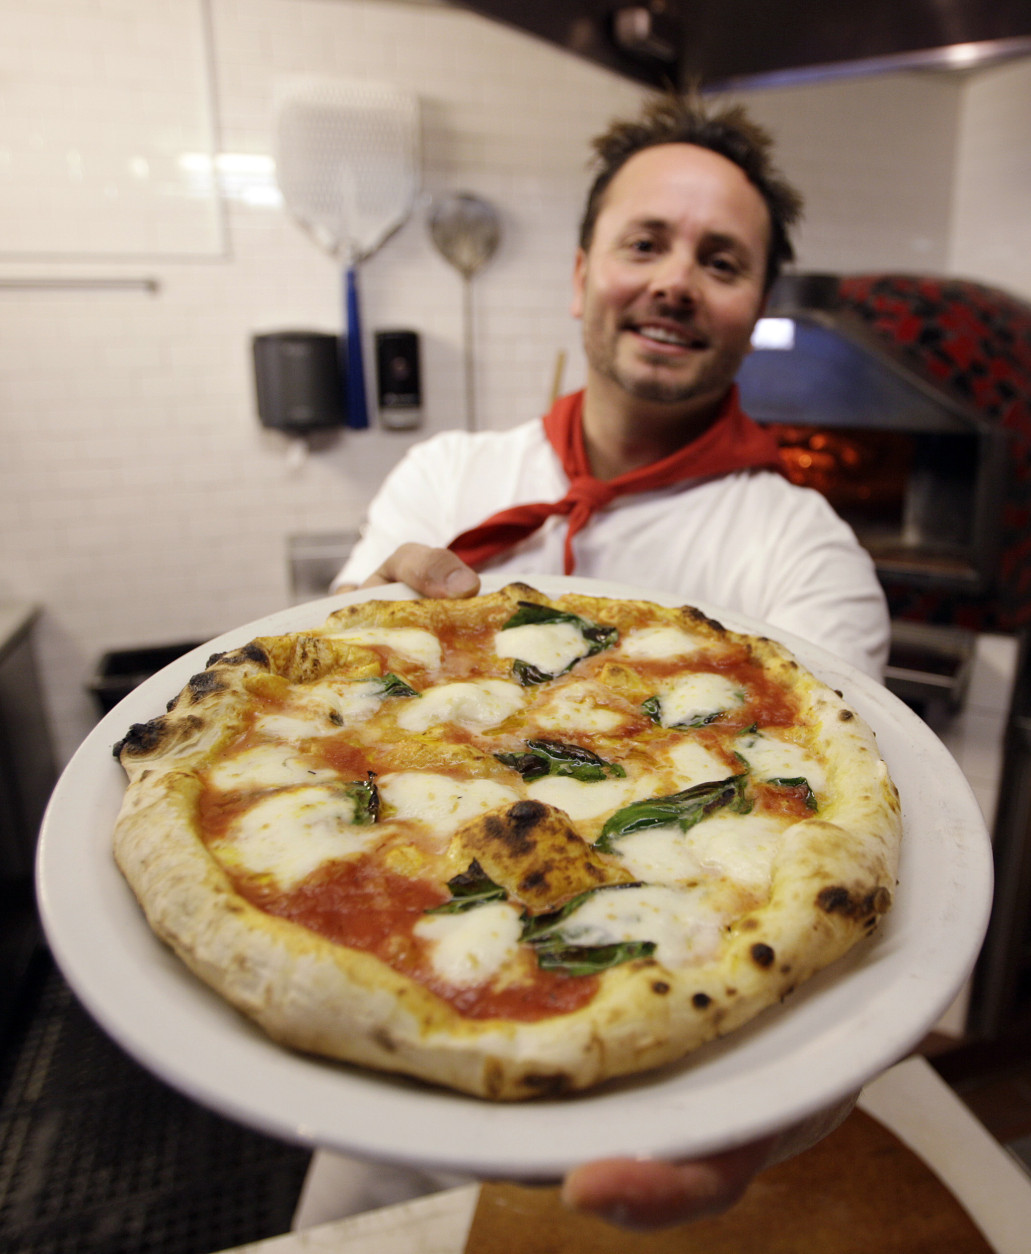 This Thursday, Jan. 27, 2011 photo shows Tony Gemignani as he holds up a pizza margherita at Tony's Pizza Napoletana in San Francisco.  Super Bowl Sunday is coming and pie-makers across the country are bracing for a pizza reaction.    (AP Photo/Eric Risberg)